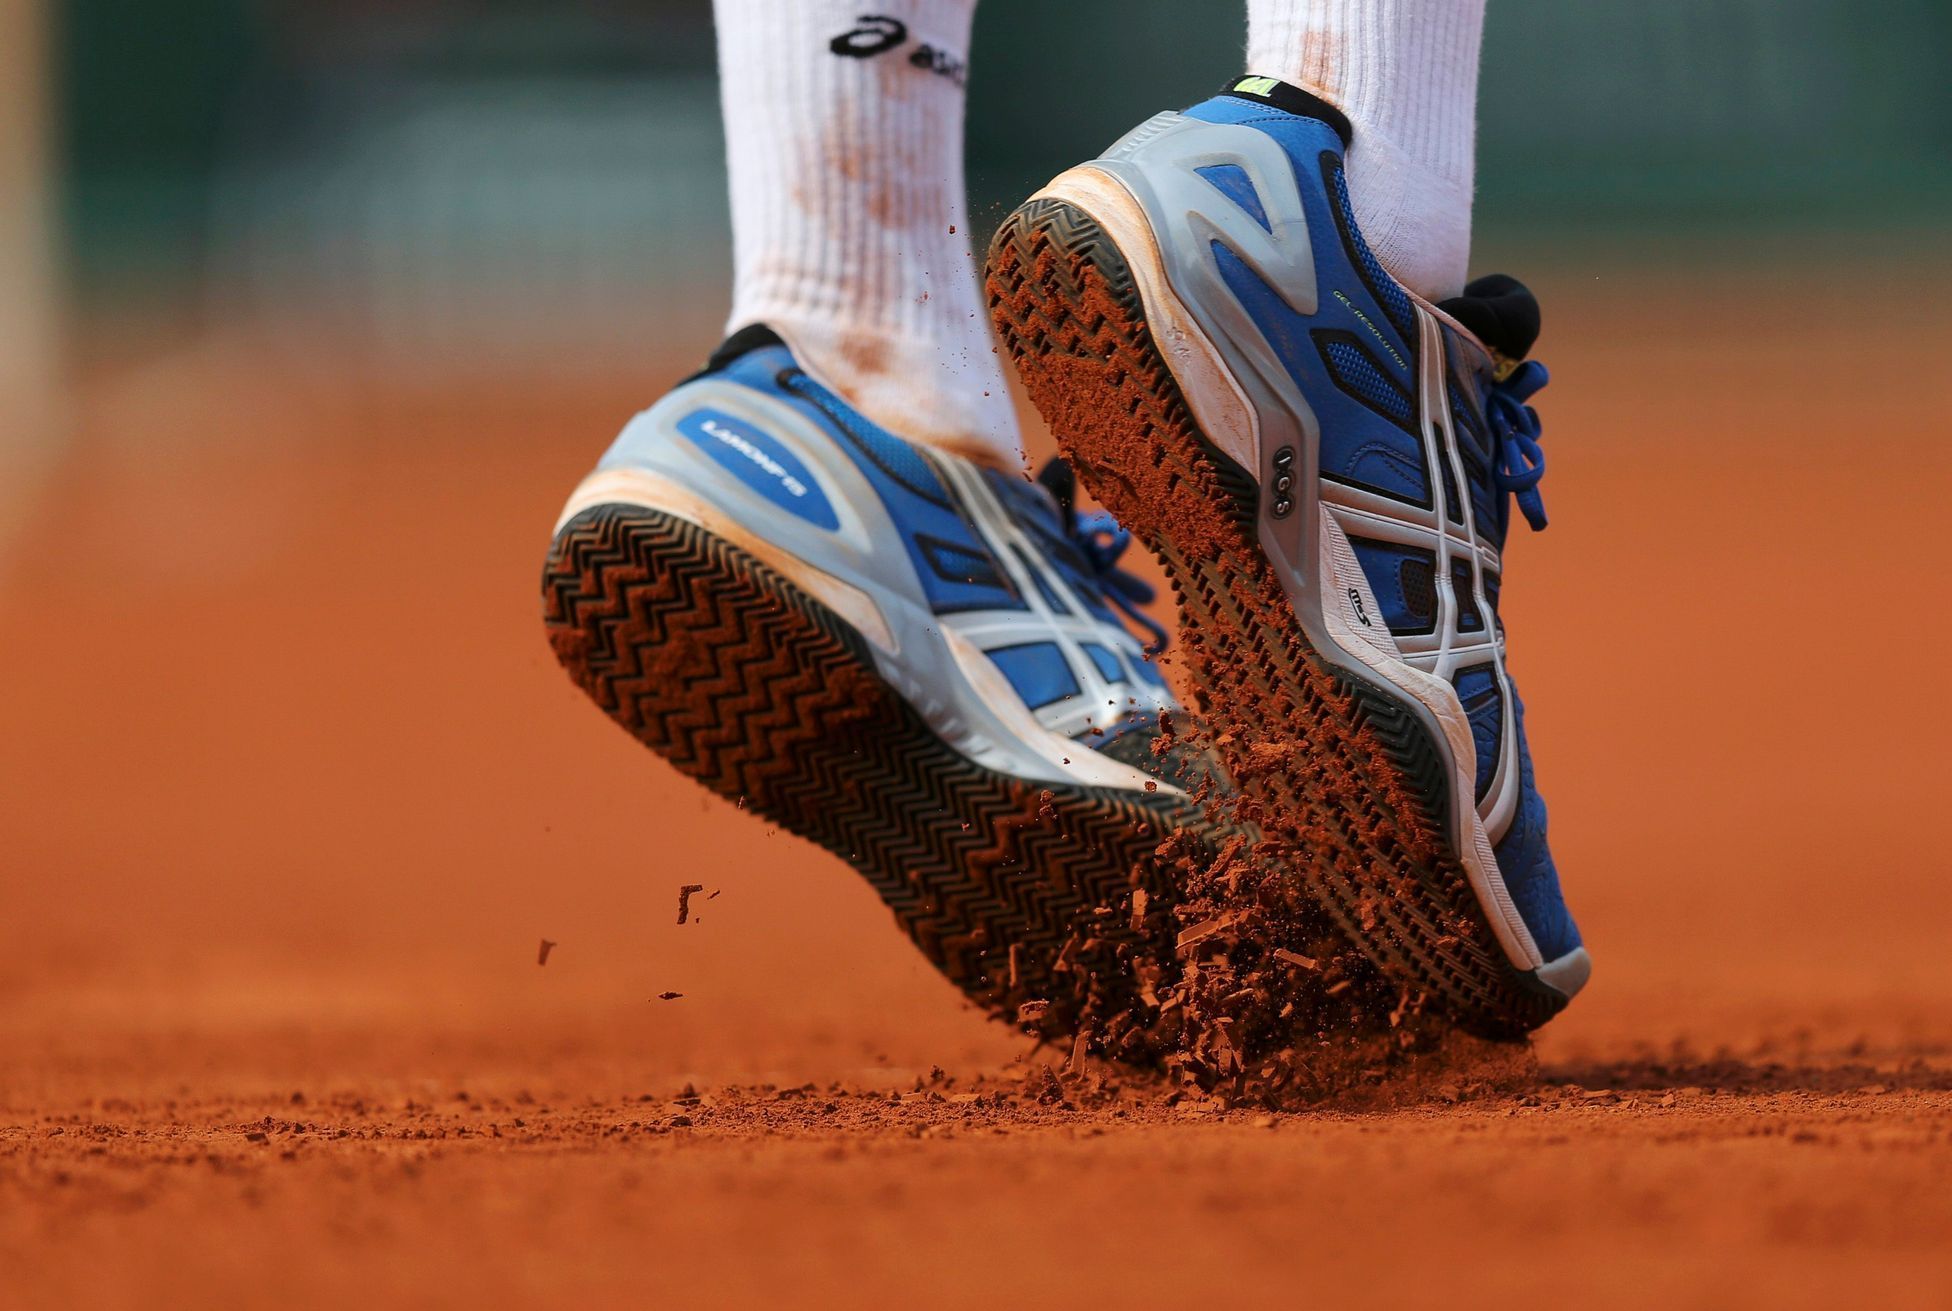 French open 2013 (Monfils)